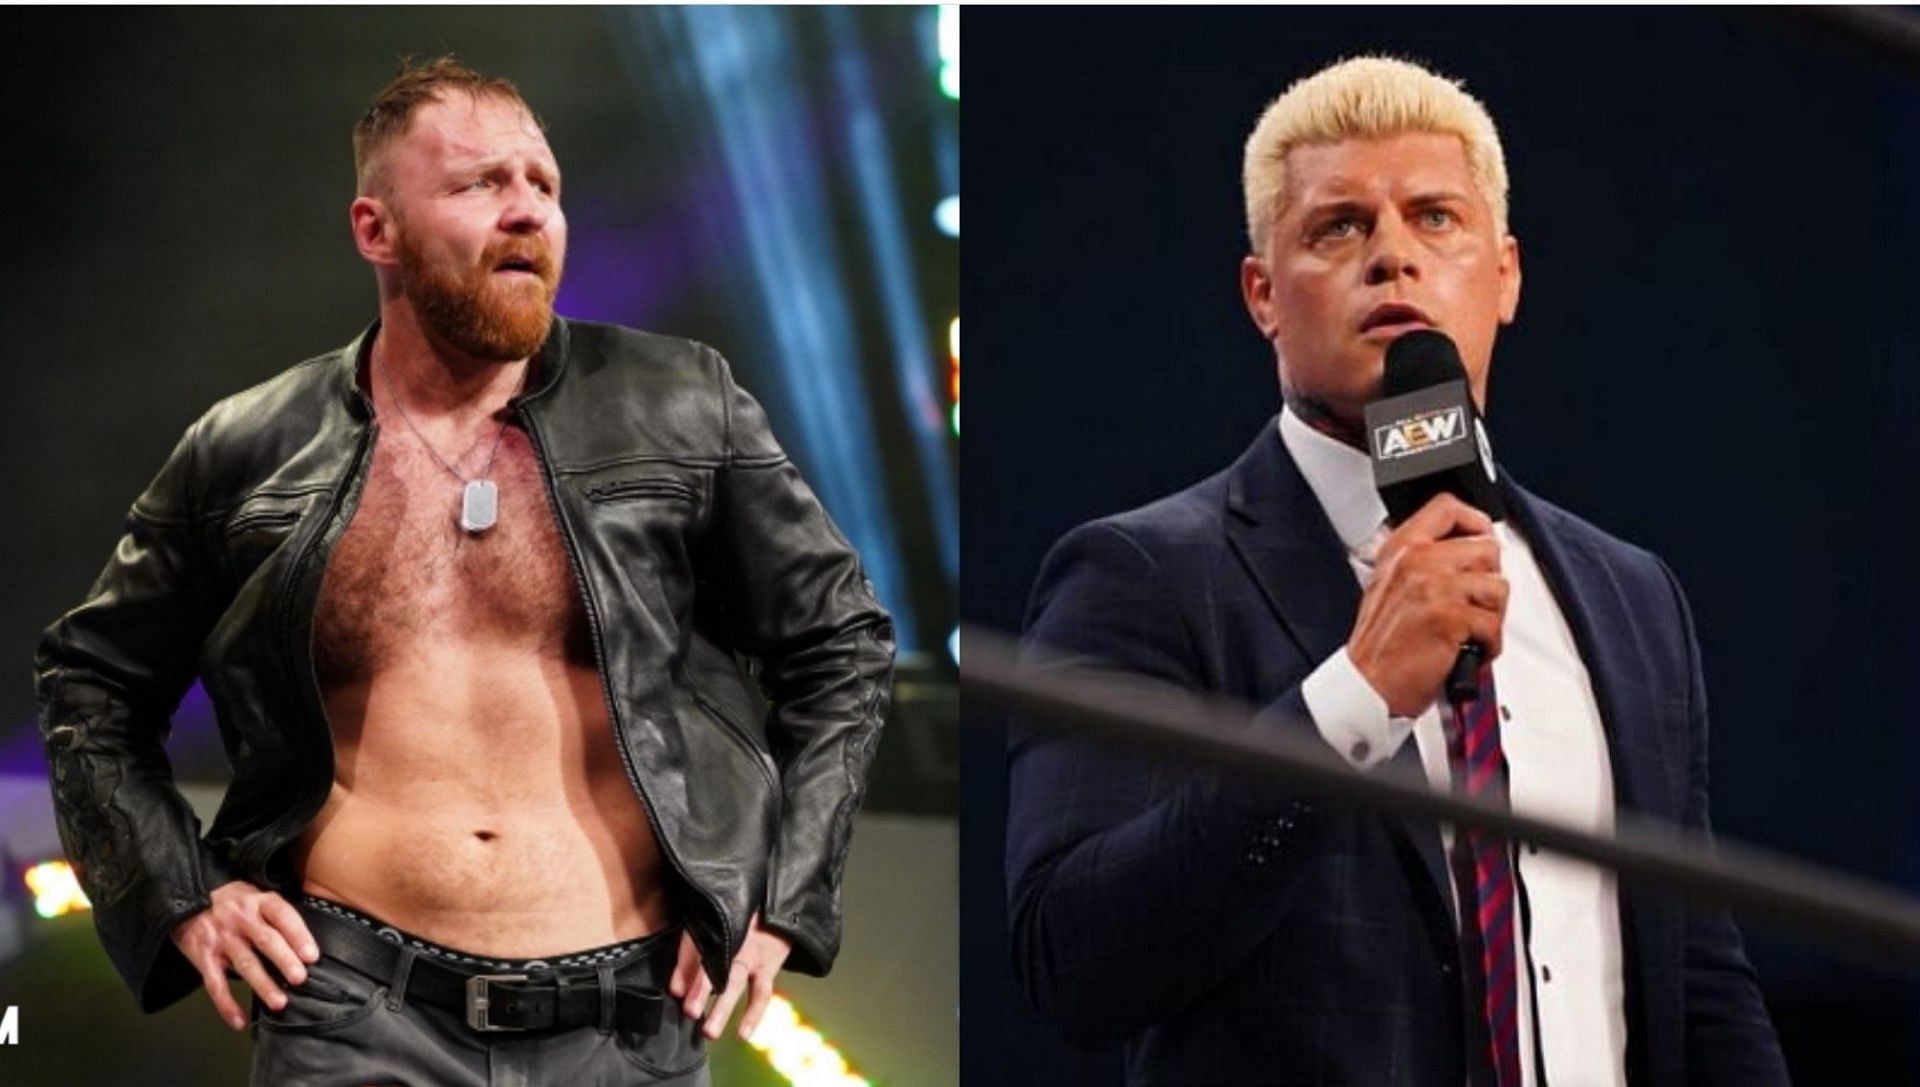 Jon Moxley (left) and Cody Rhodes (right)